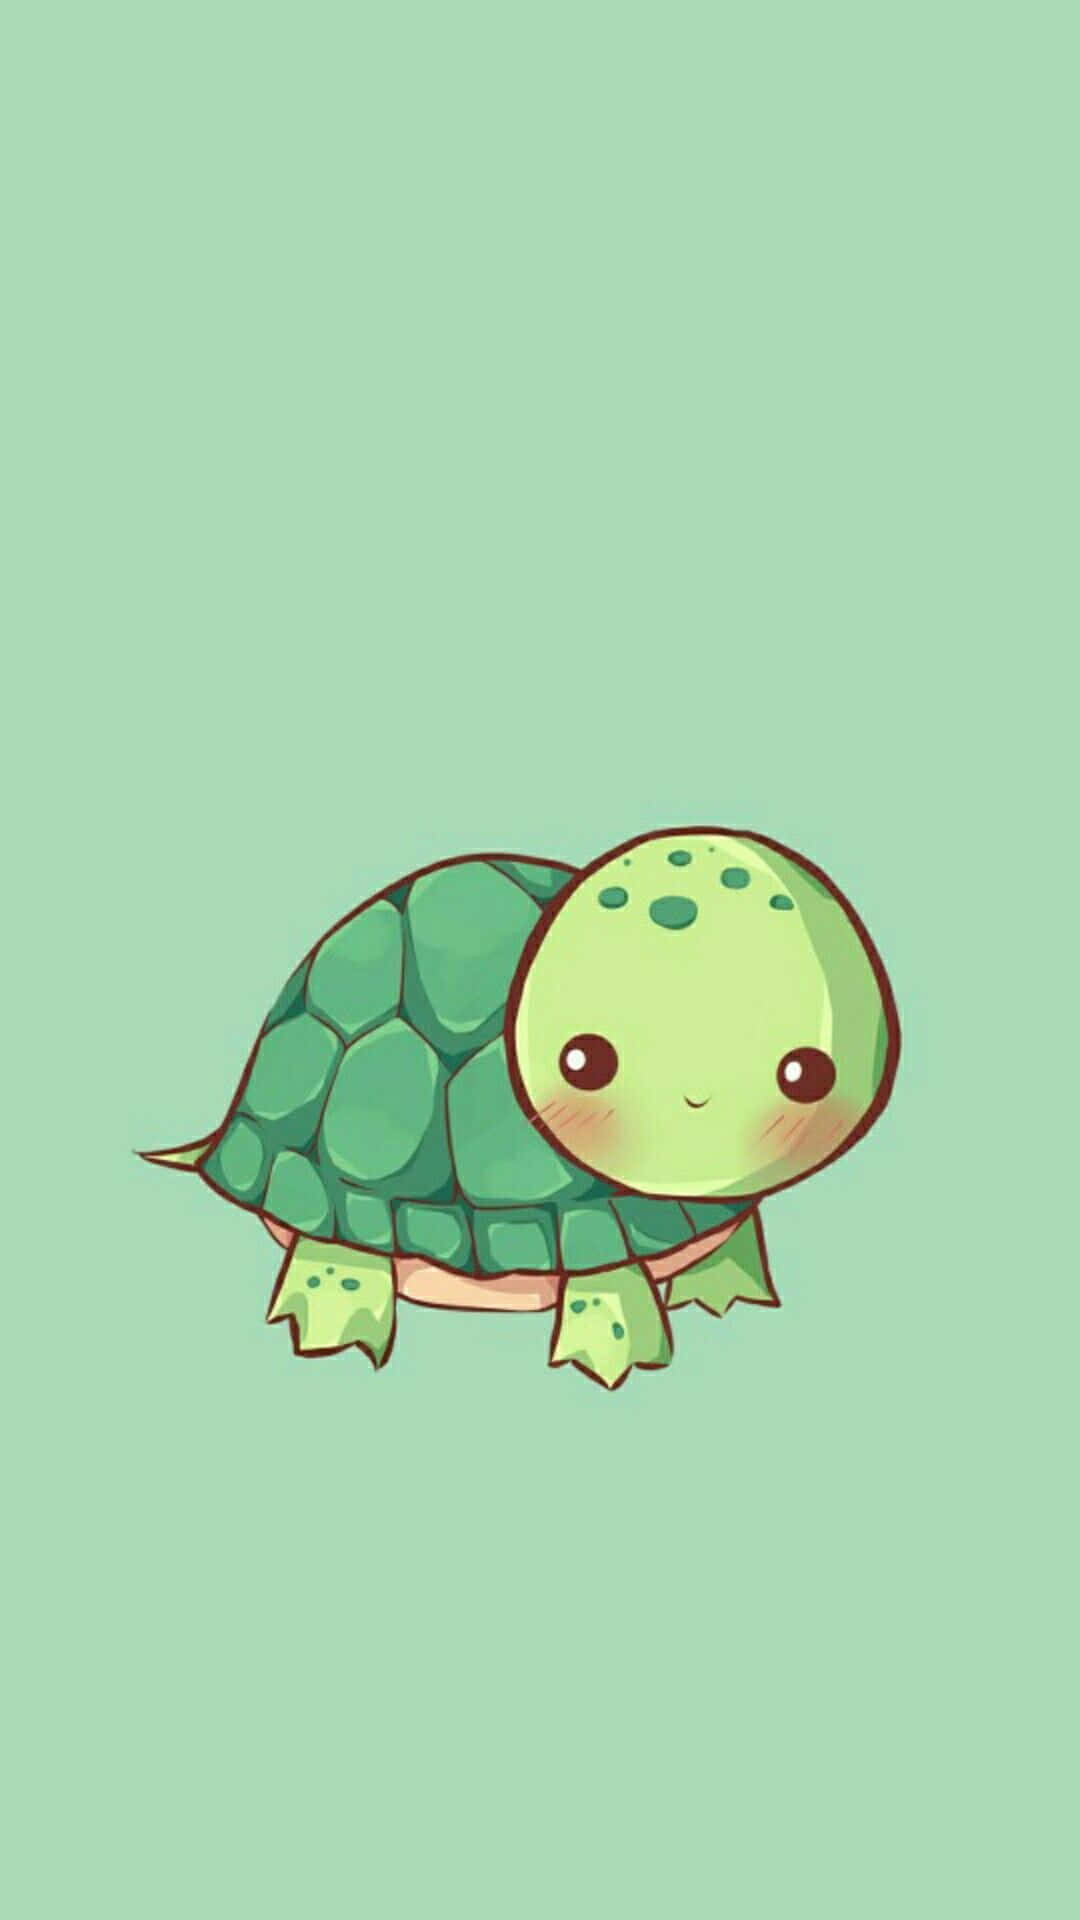 Brighten up your day with this cute and kawaii green friend! Wallpaper